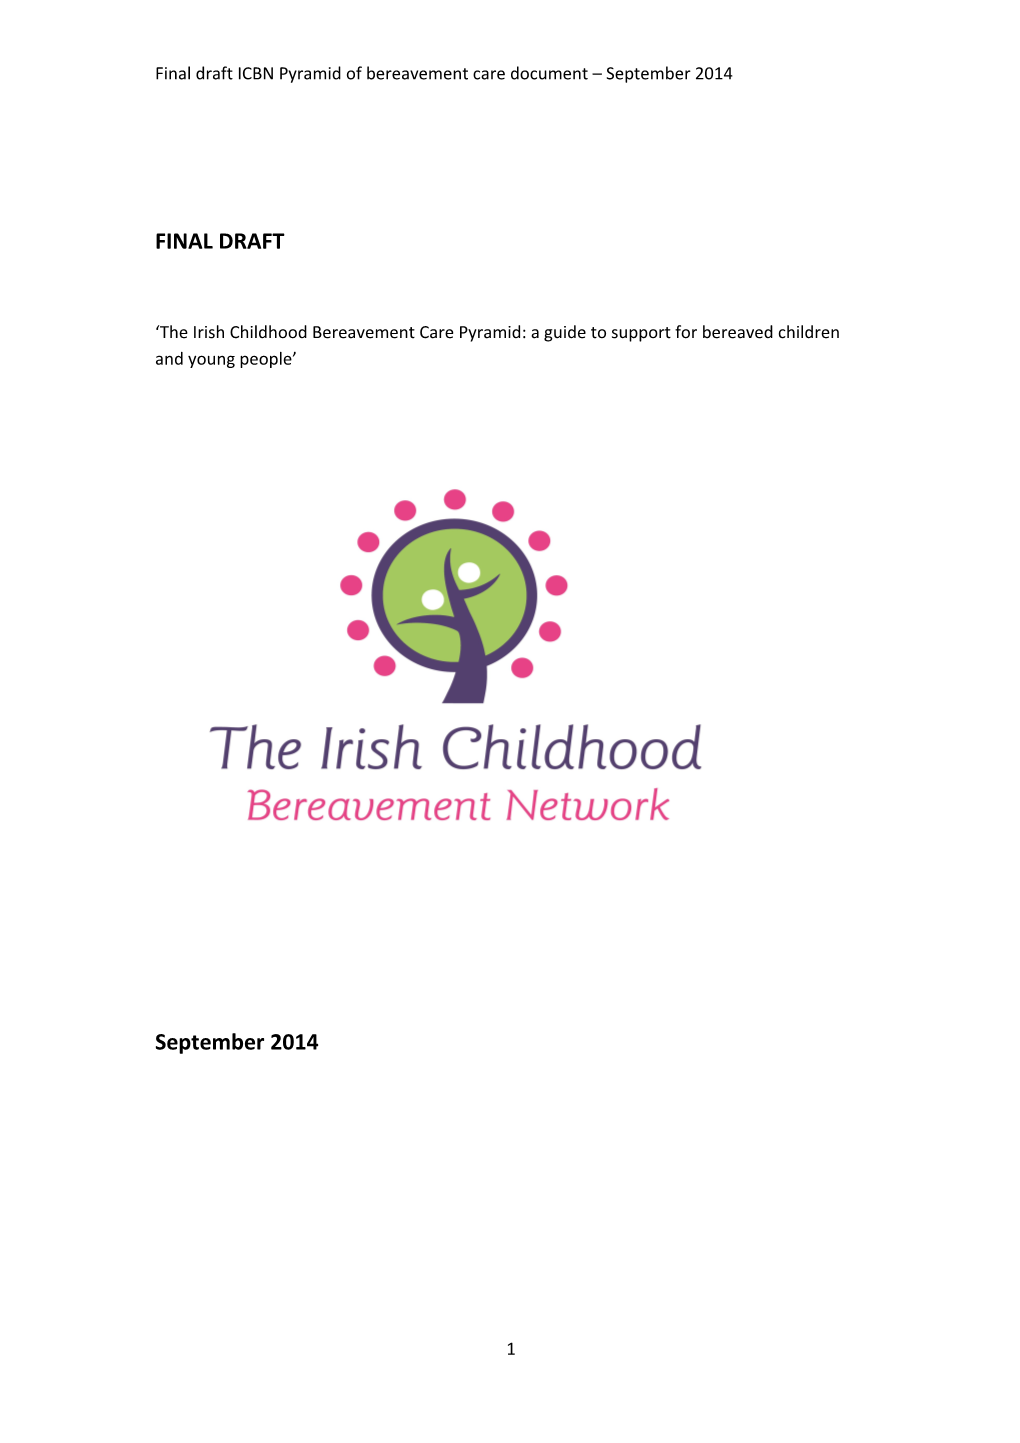 Final Draft ICBN Pyramid of Bereavement Care Document September 2014